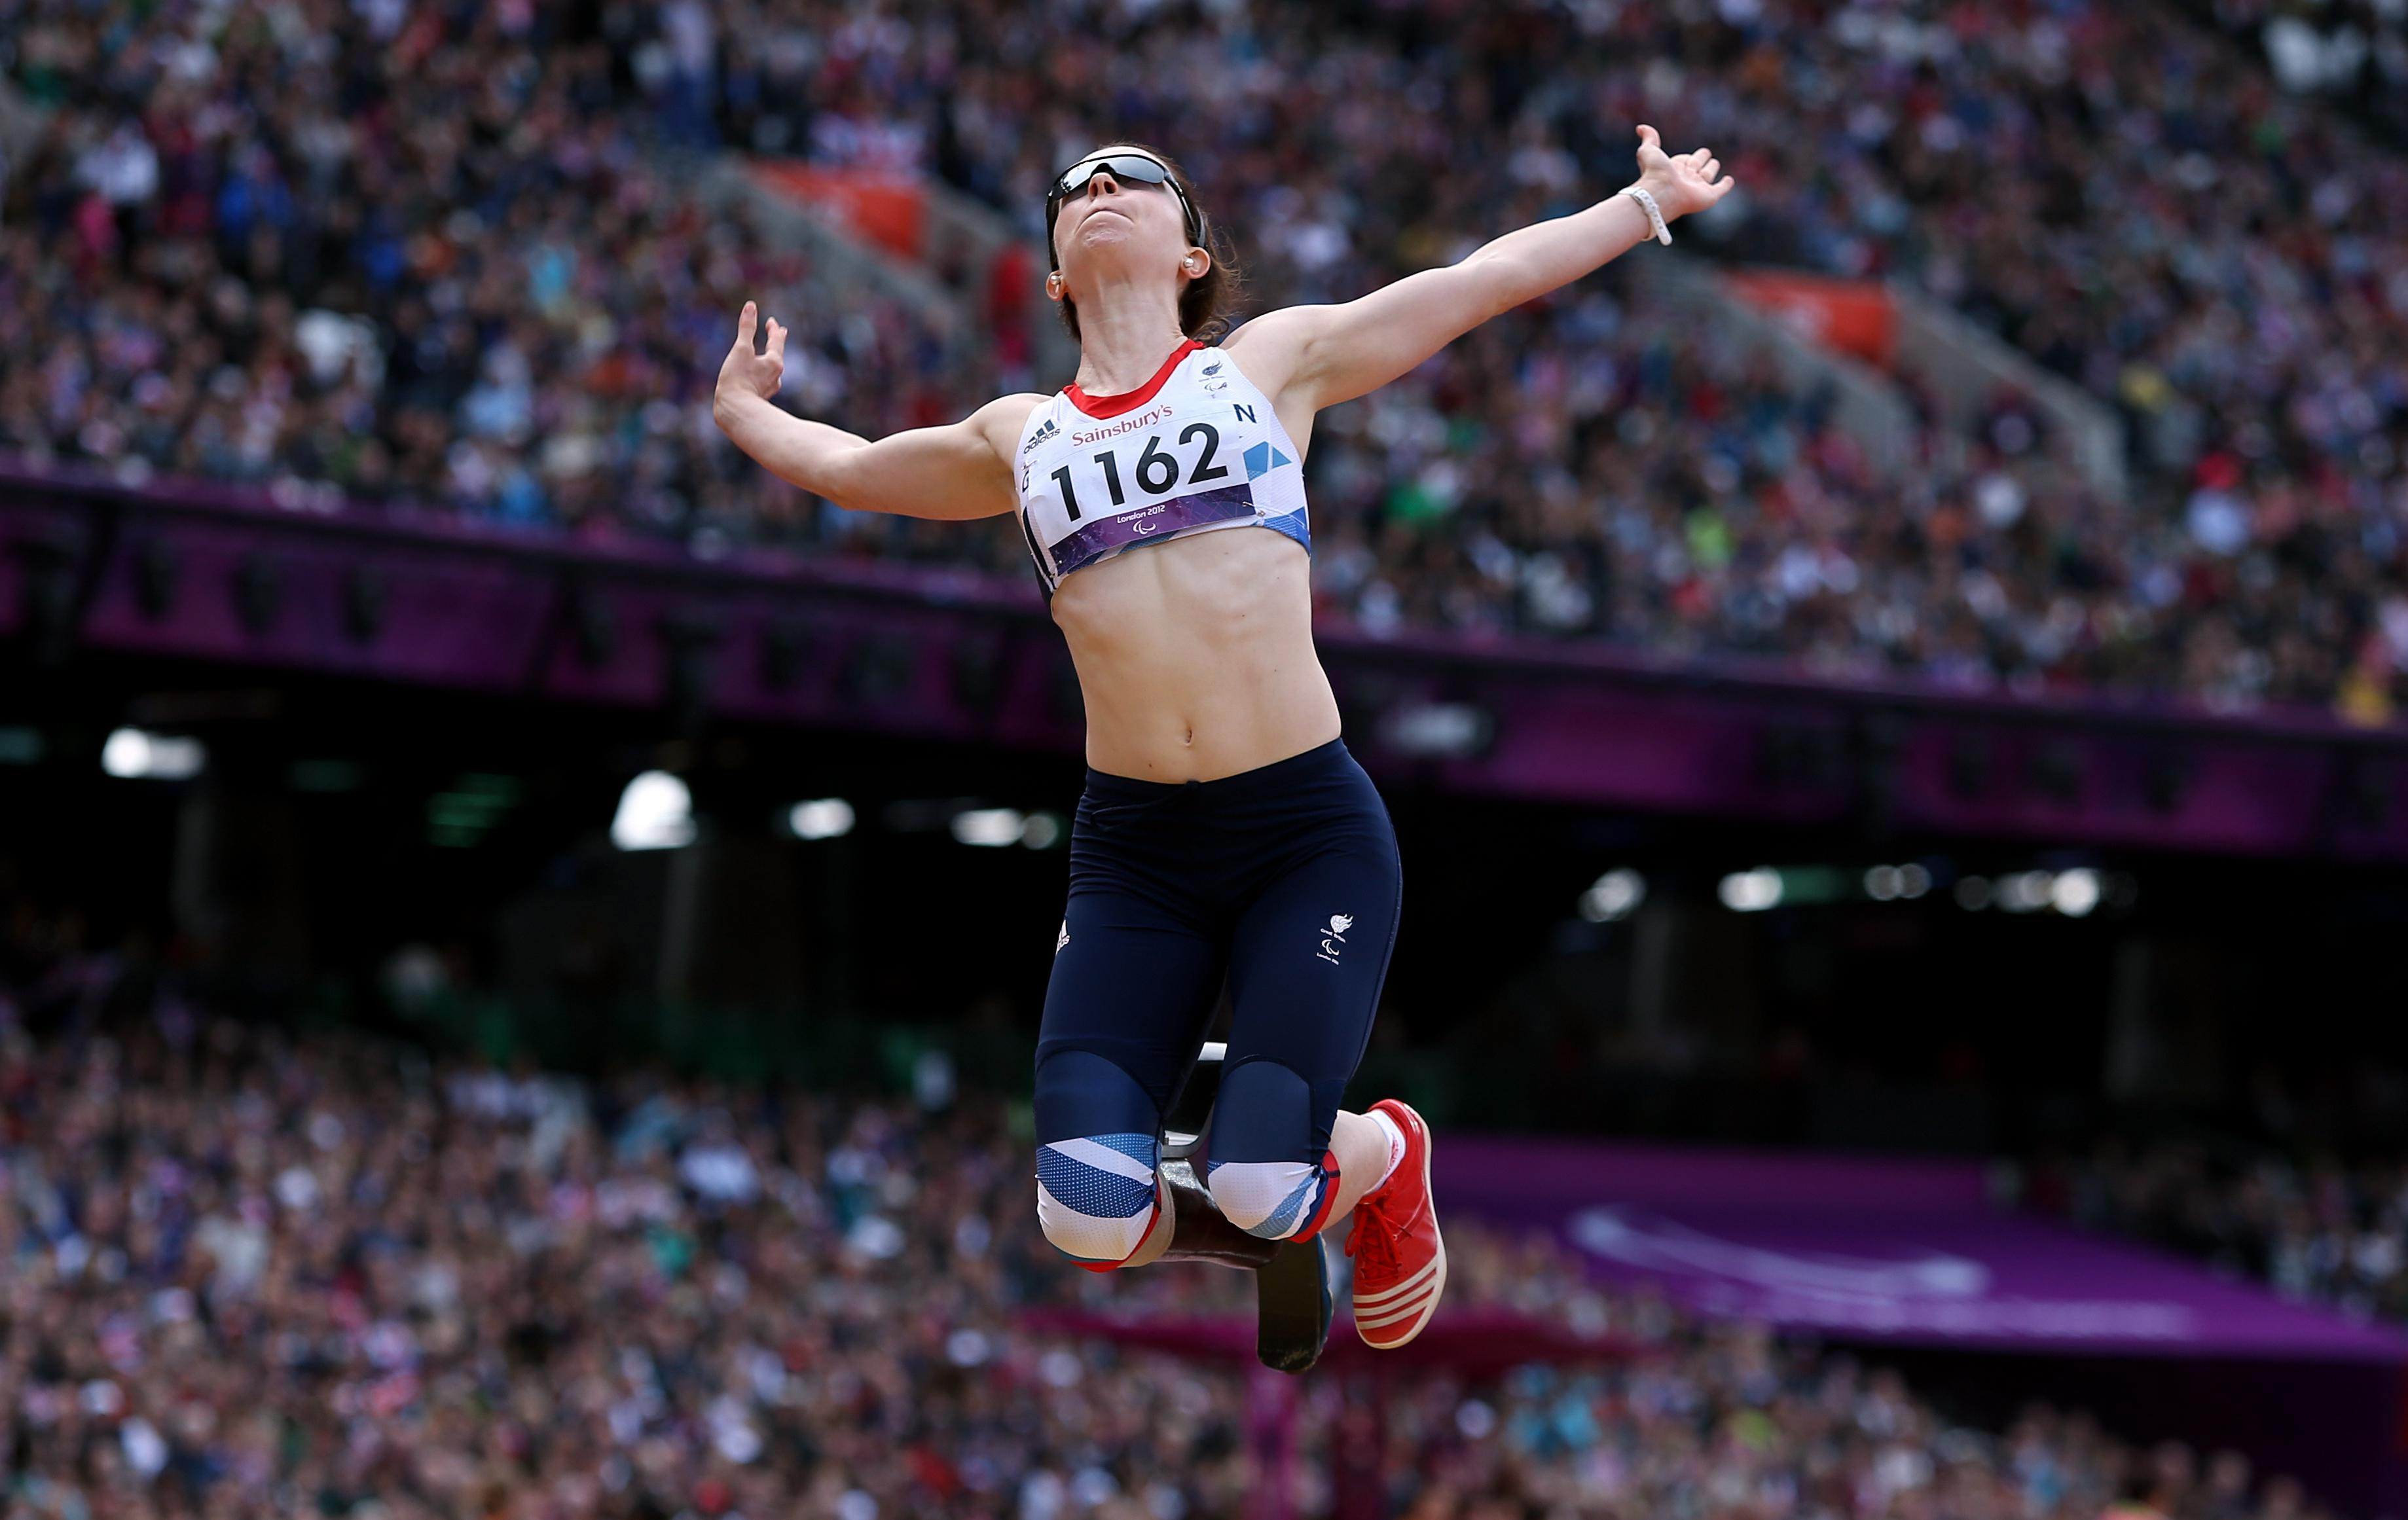 Stef reid doing long jump at the london 2012 paralympics